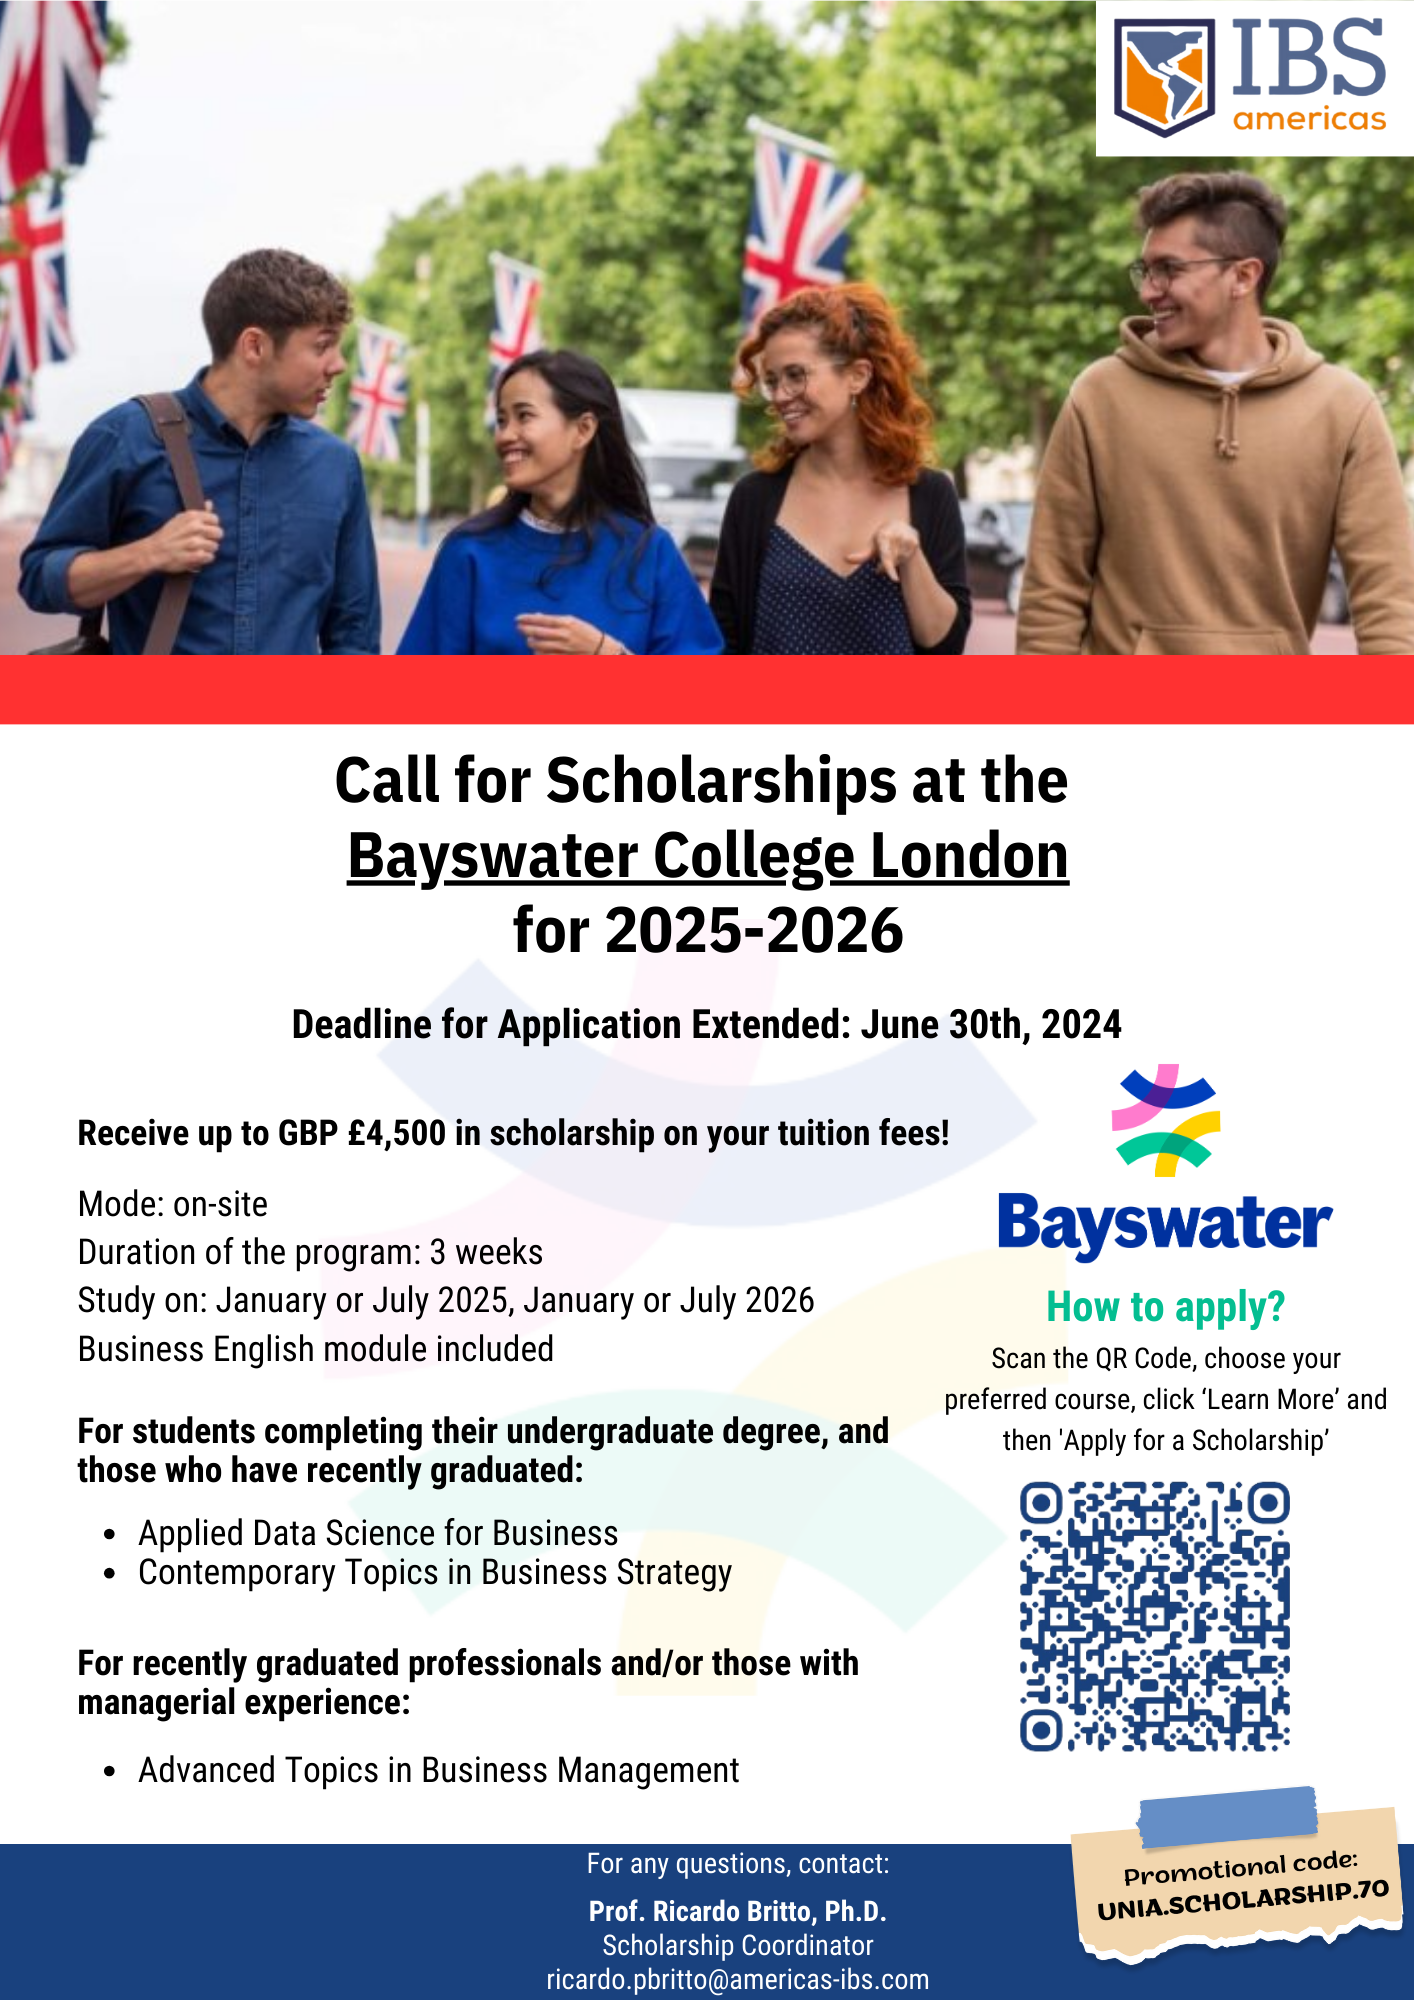 Call for Scholarships at the Bayswater College London 2025-2026